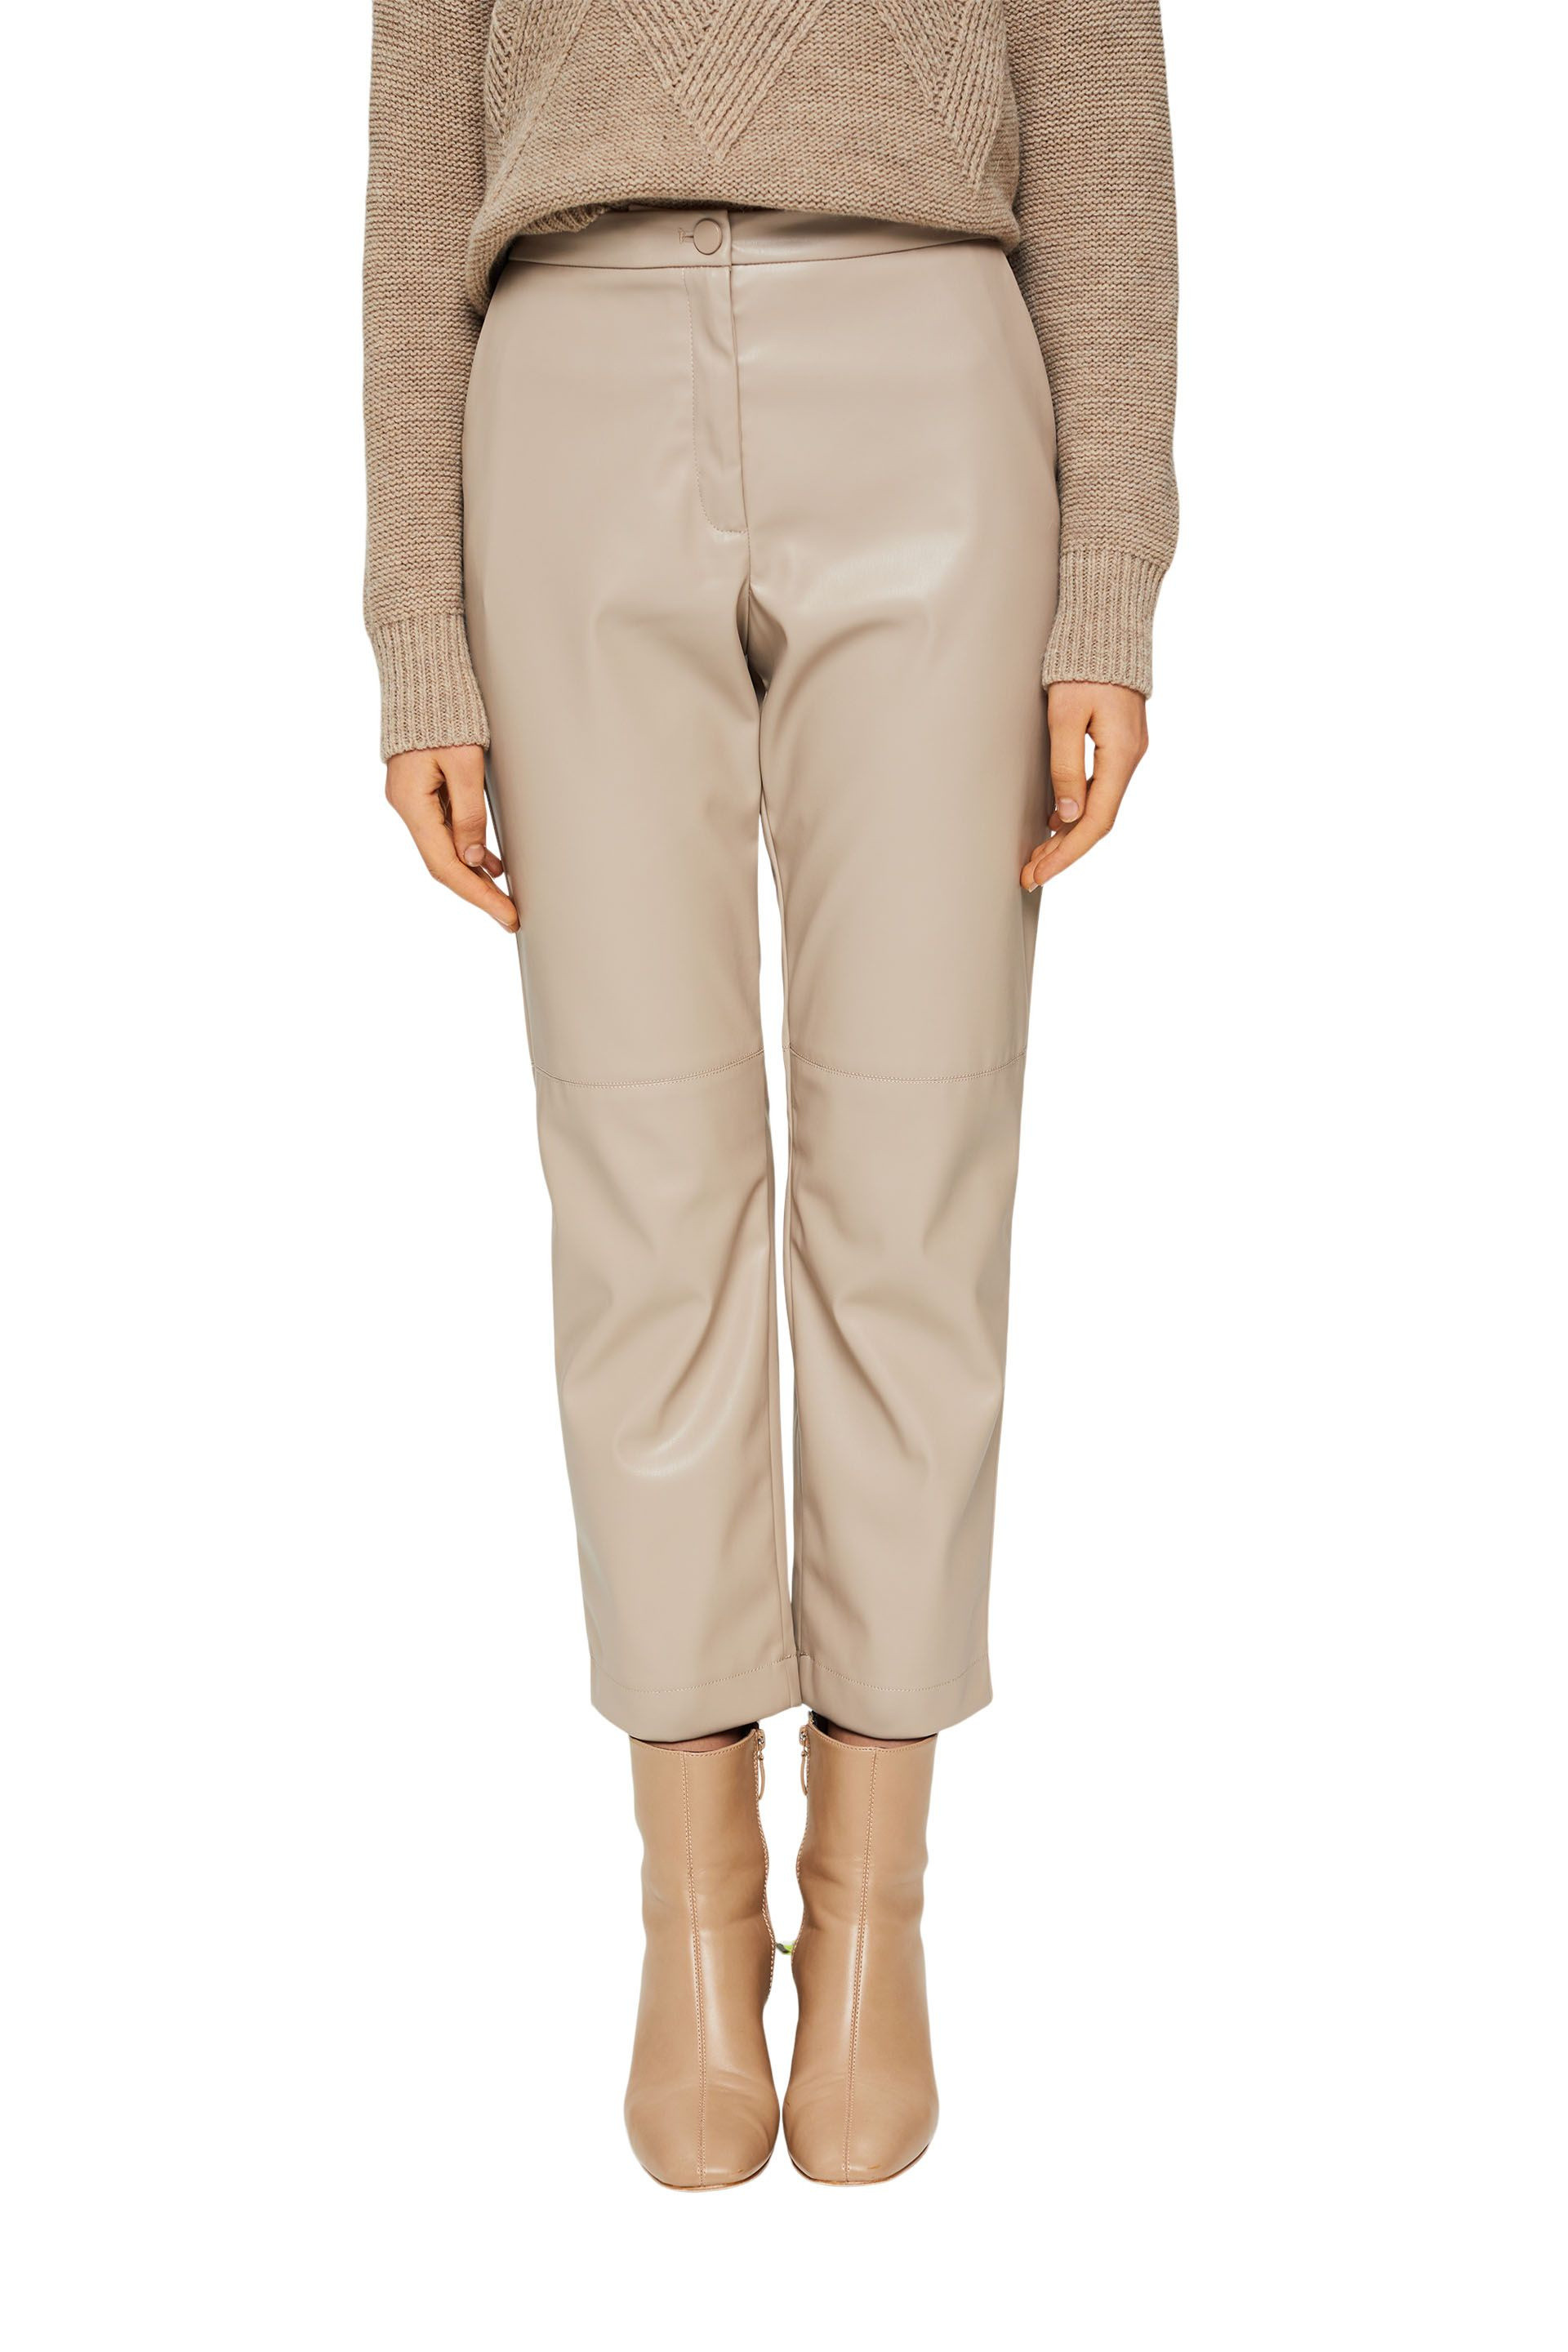 Cropped faux leather trousers, Light Beige, large image number 1